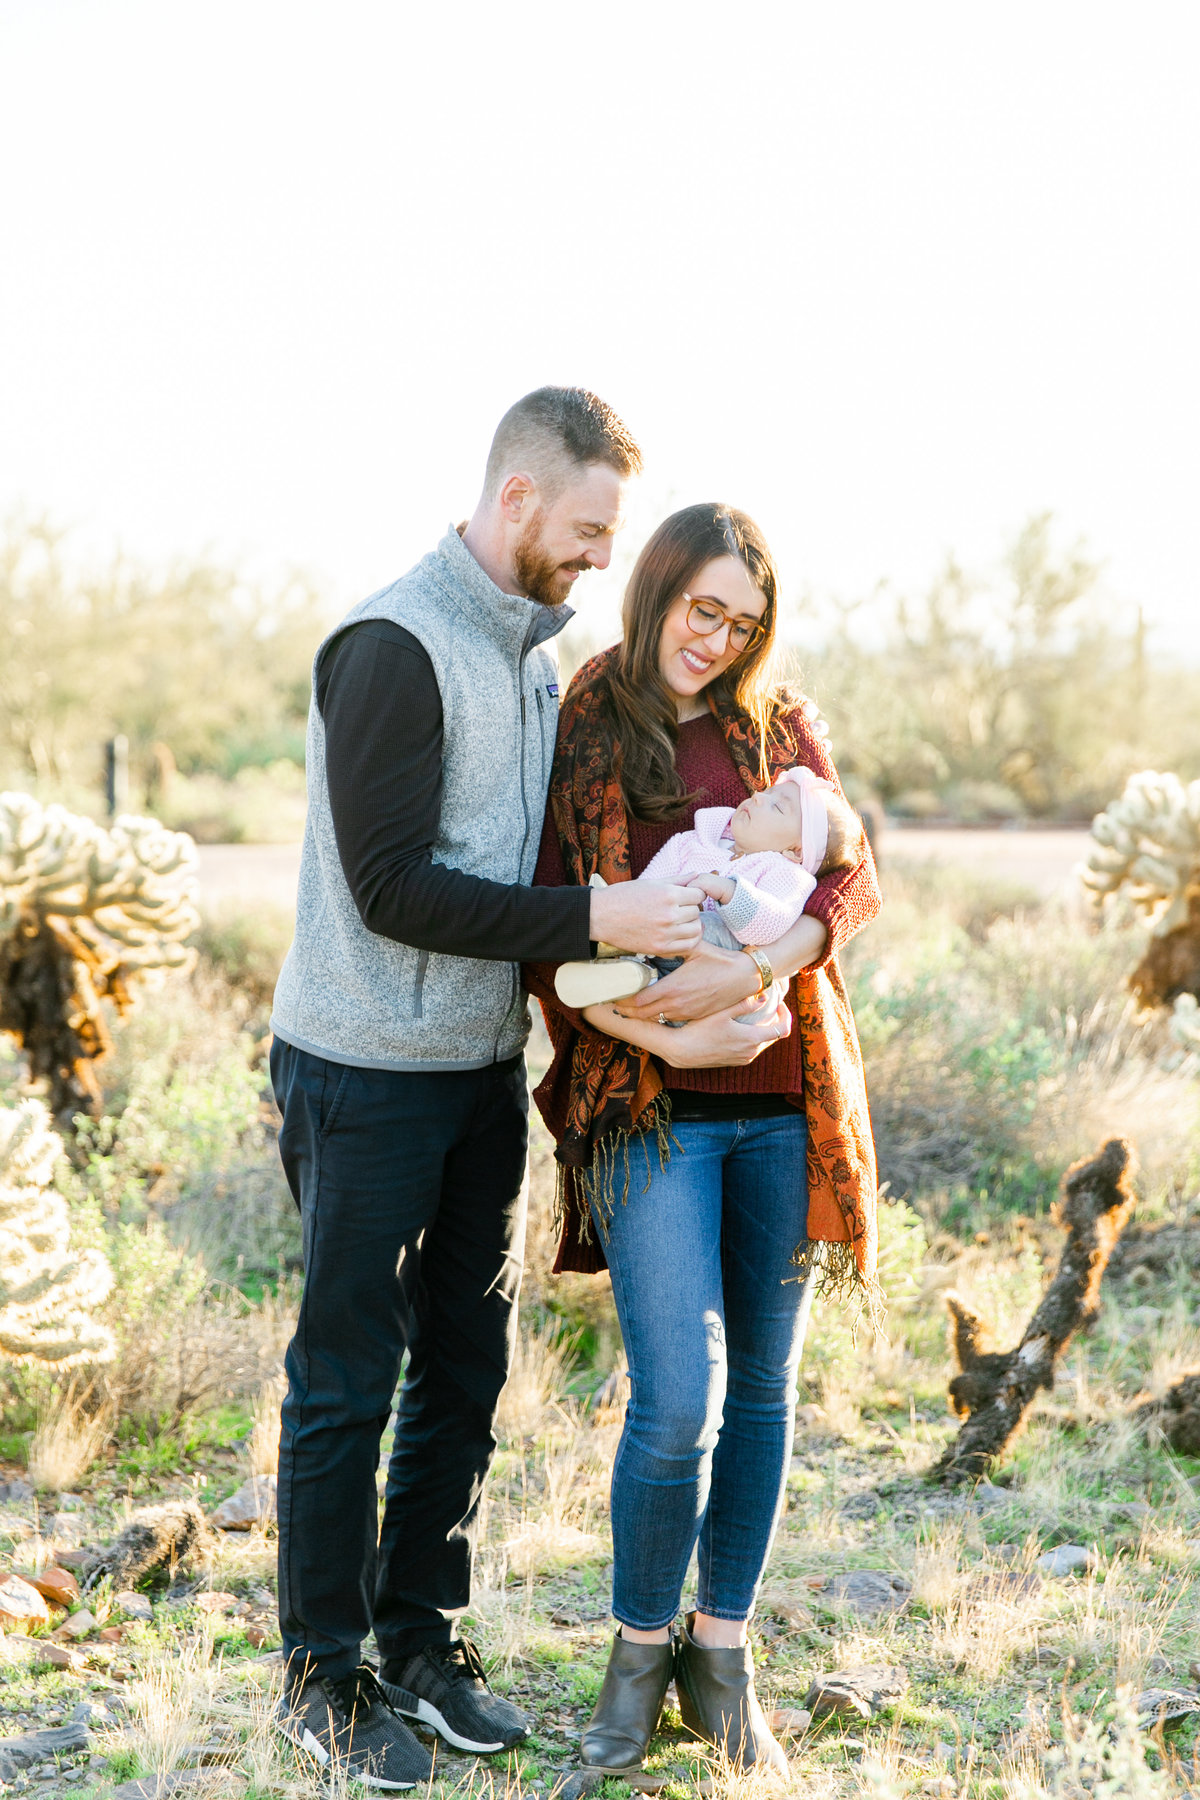 Karlie Colleen Photography - Scottsdale Family Photography - Lauren & Family-56